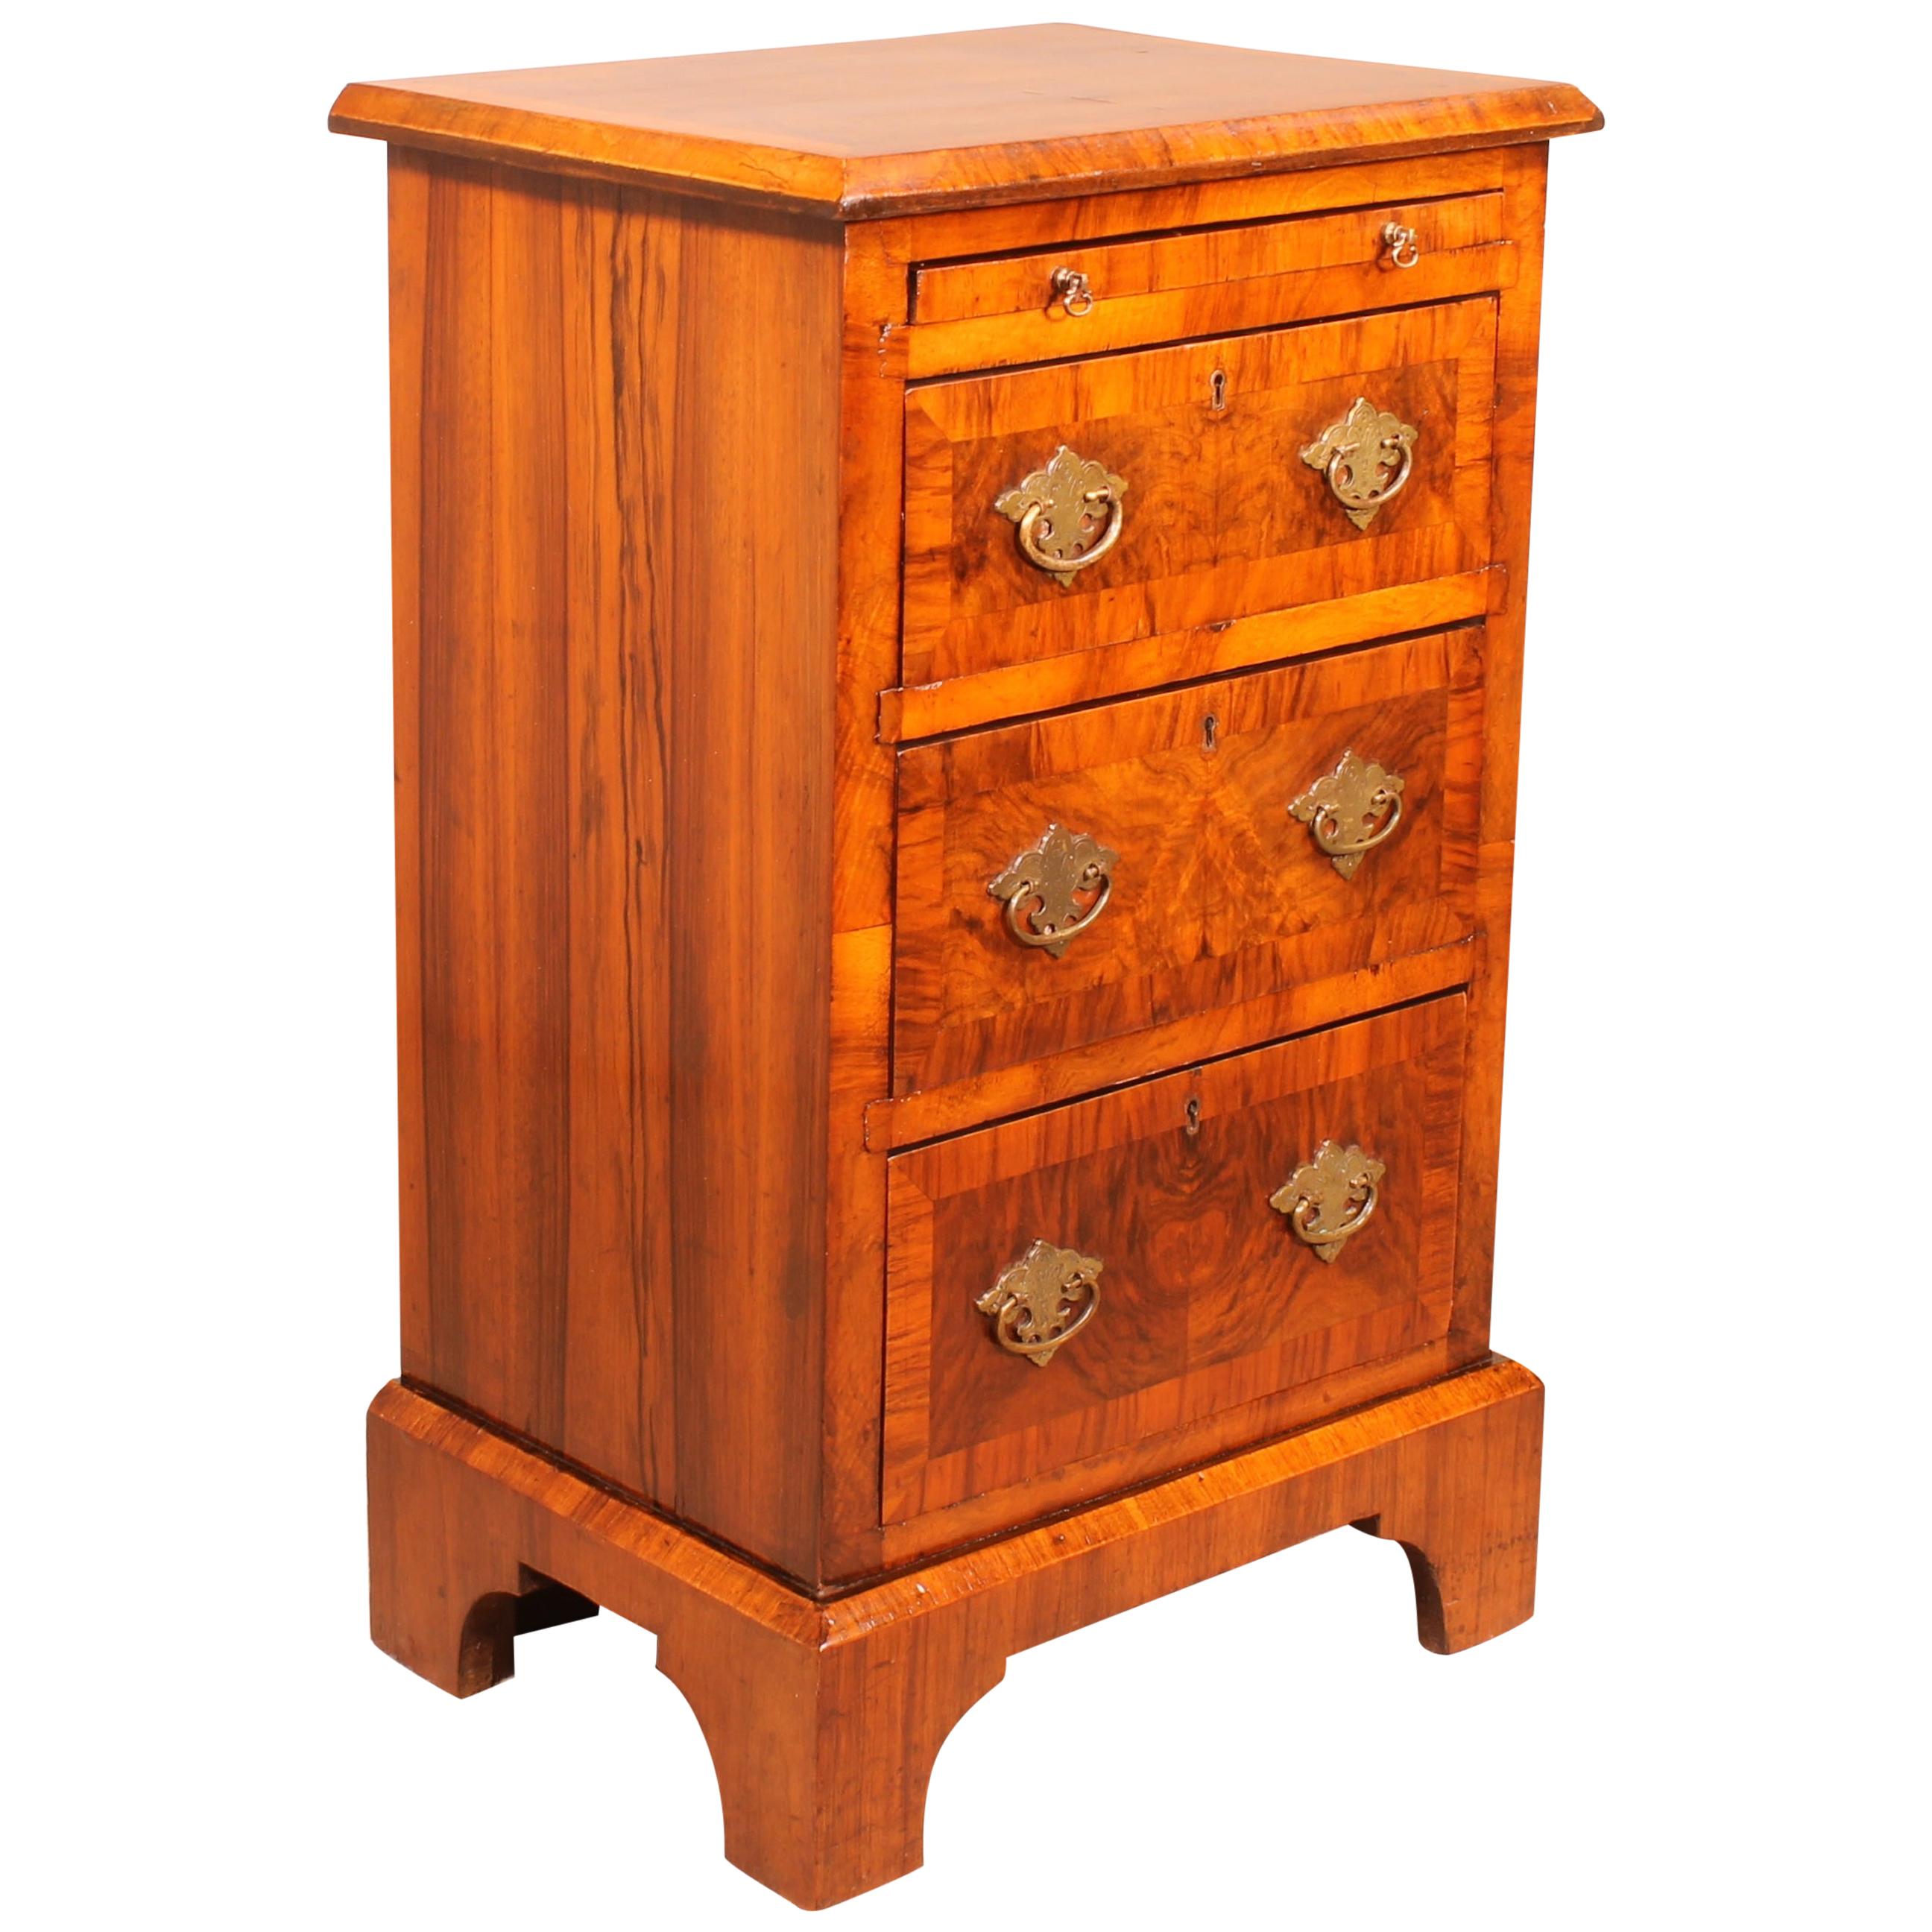 Bedside or Mini Chest from the 19th Century in Blurr Walnut